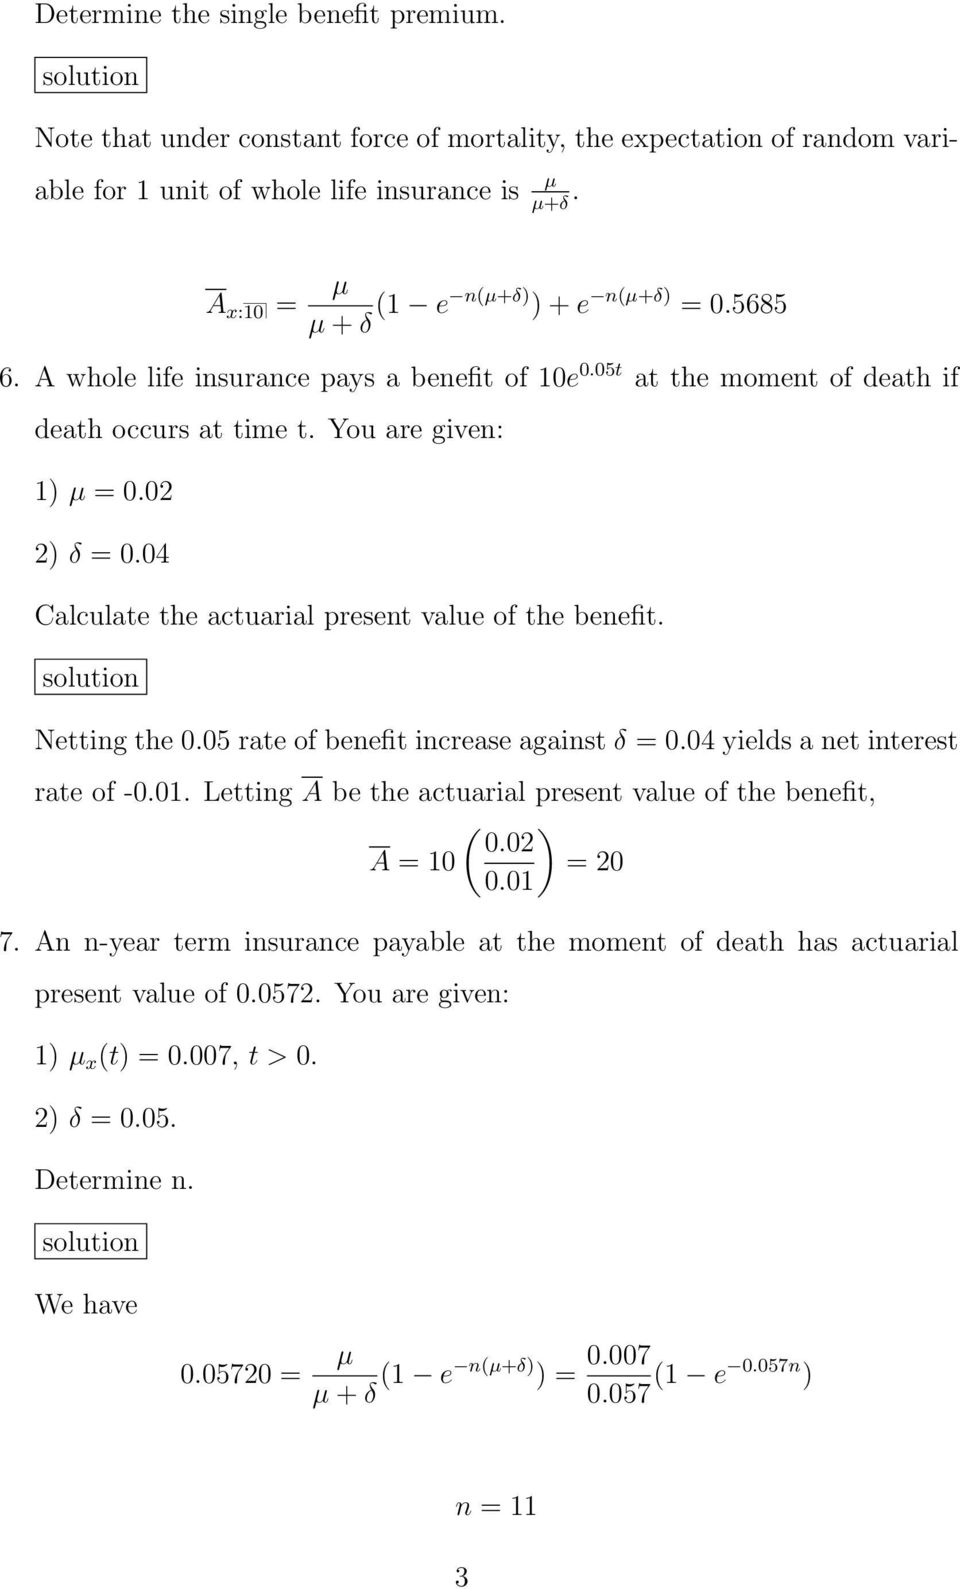 04 Calculate the actuarial present value of the benefit. Netting the 0.05 rate of benefit increase against δ = 0.04 yields a net interest rate of -0.01.